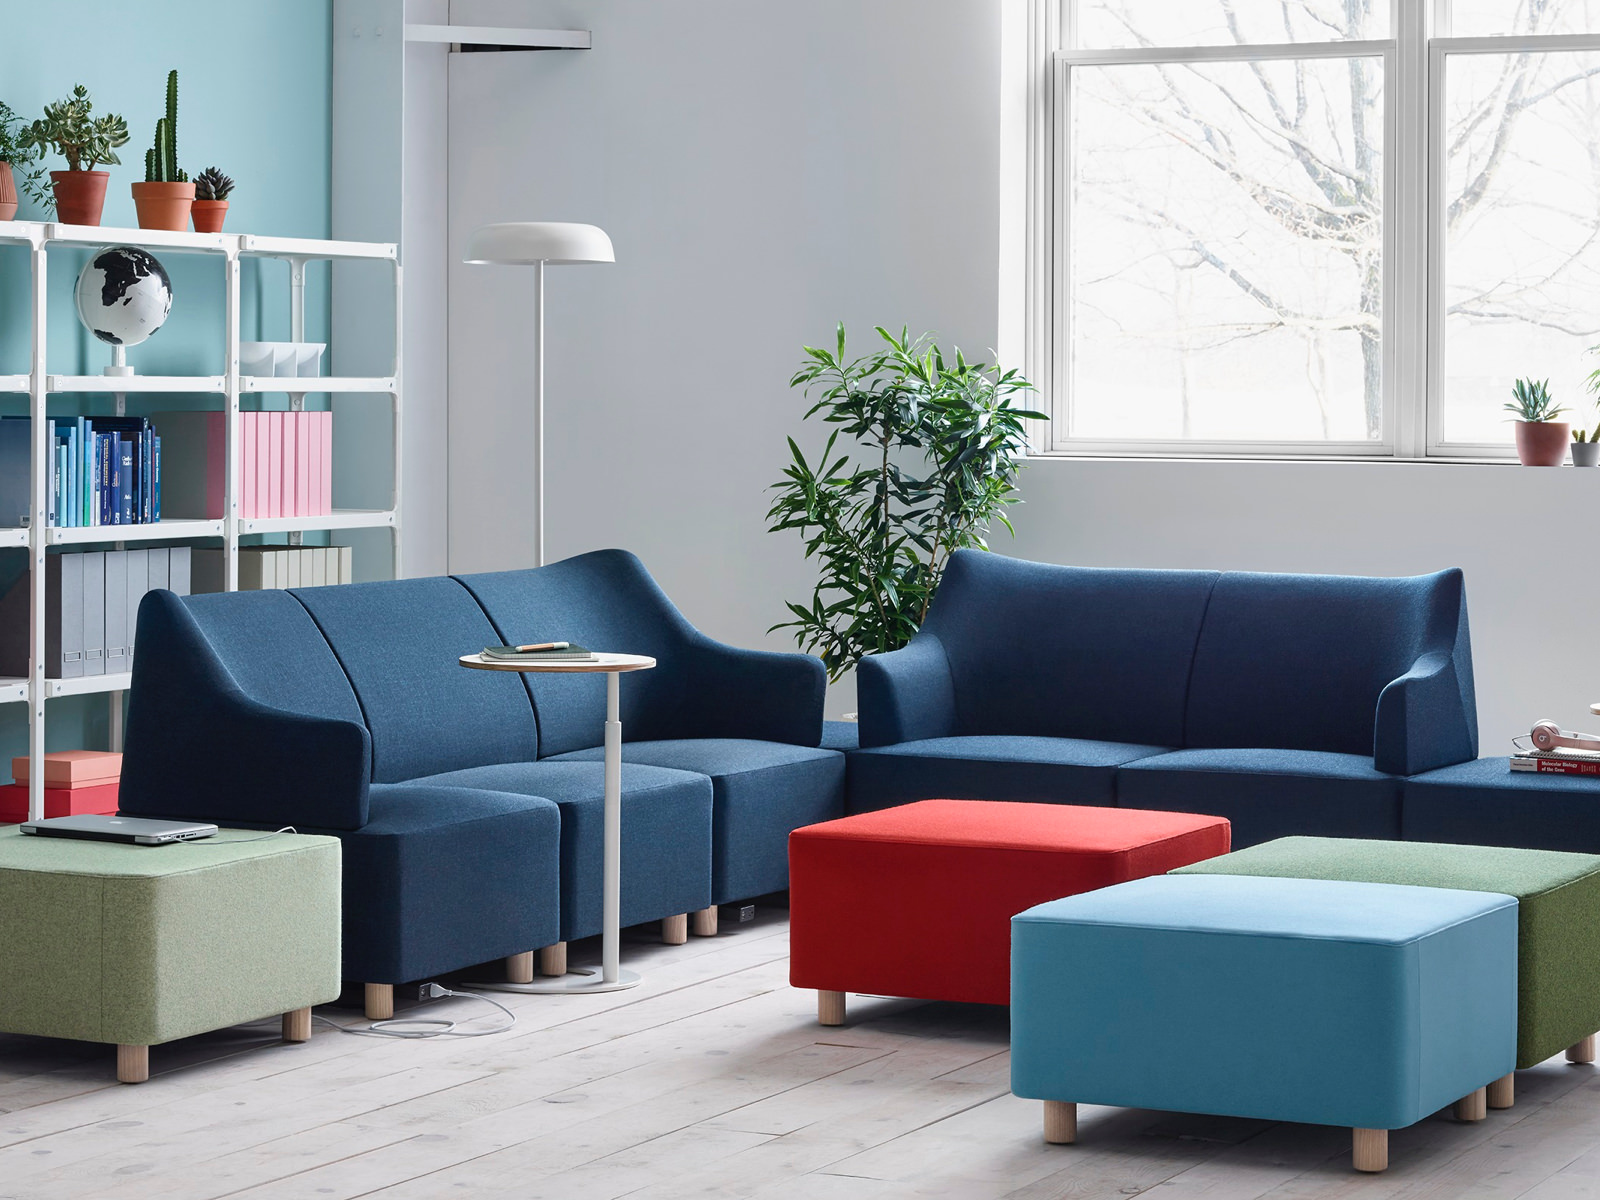 A casual sitting area containing modular Plex Lounge Furniture and ottomans in shades of blue, green, and red.